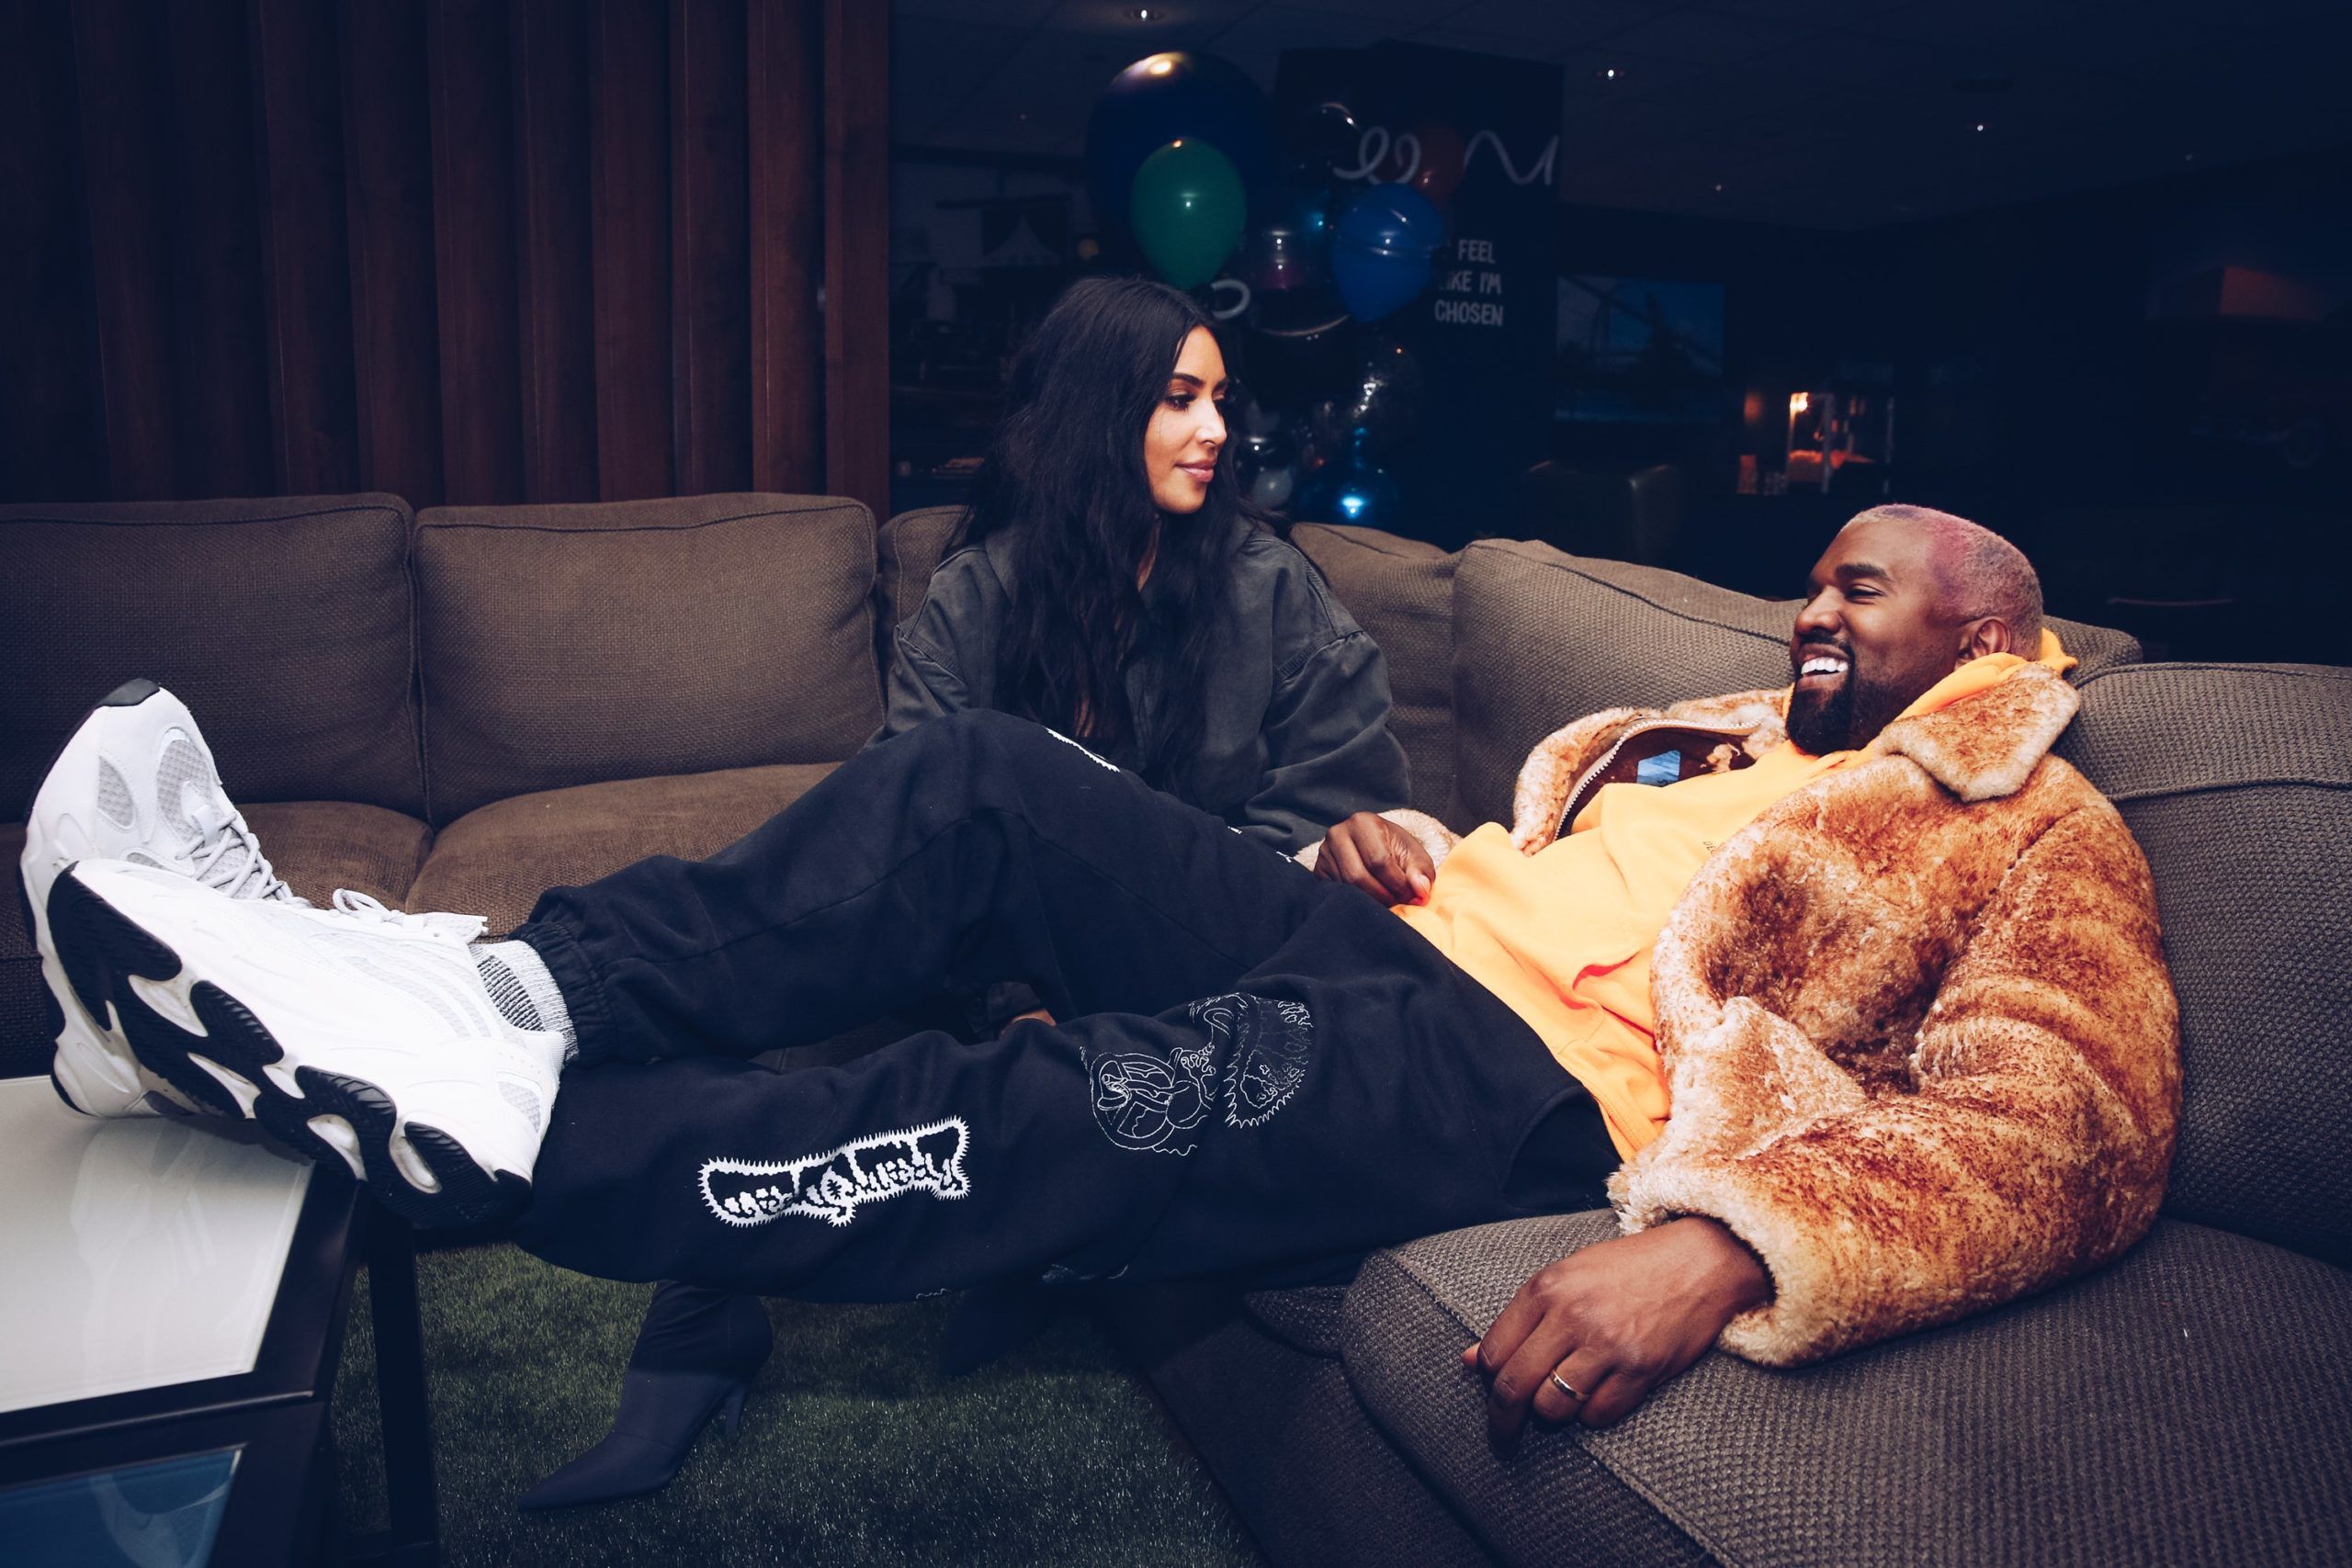 A history of Kanye West dressing the women he dates